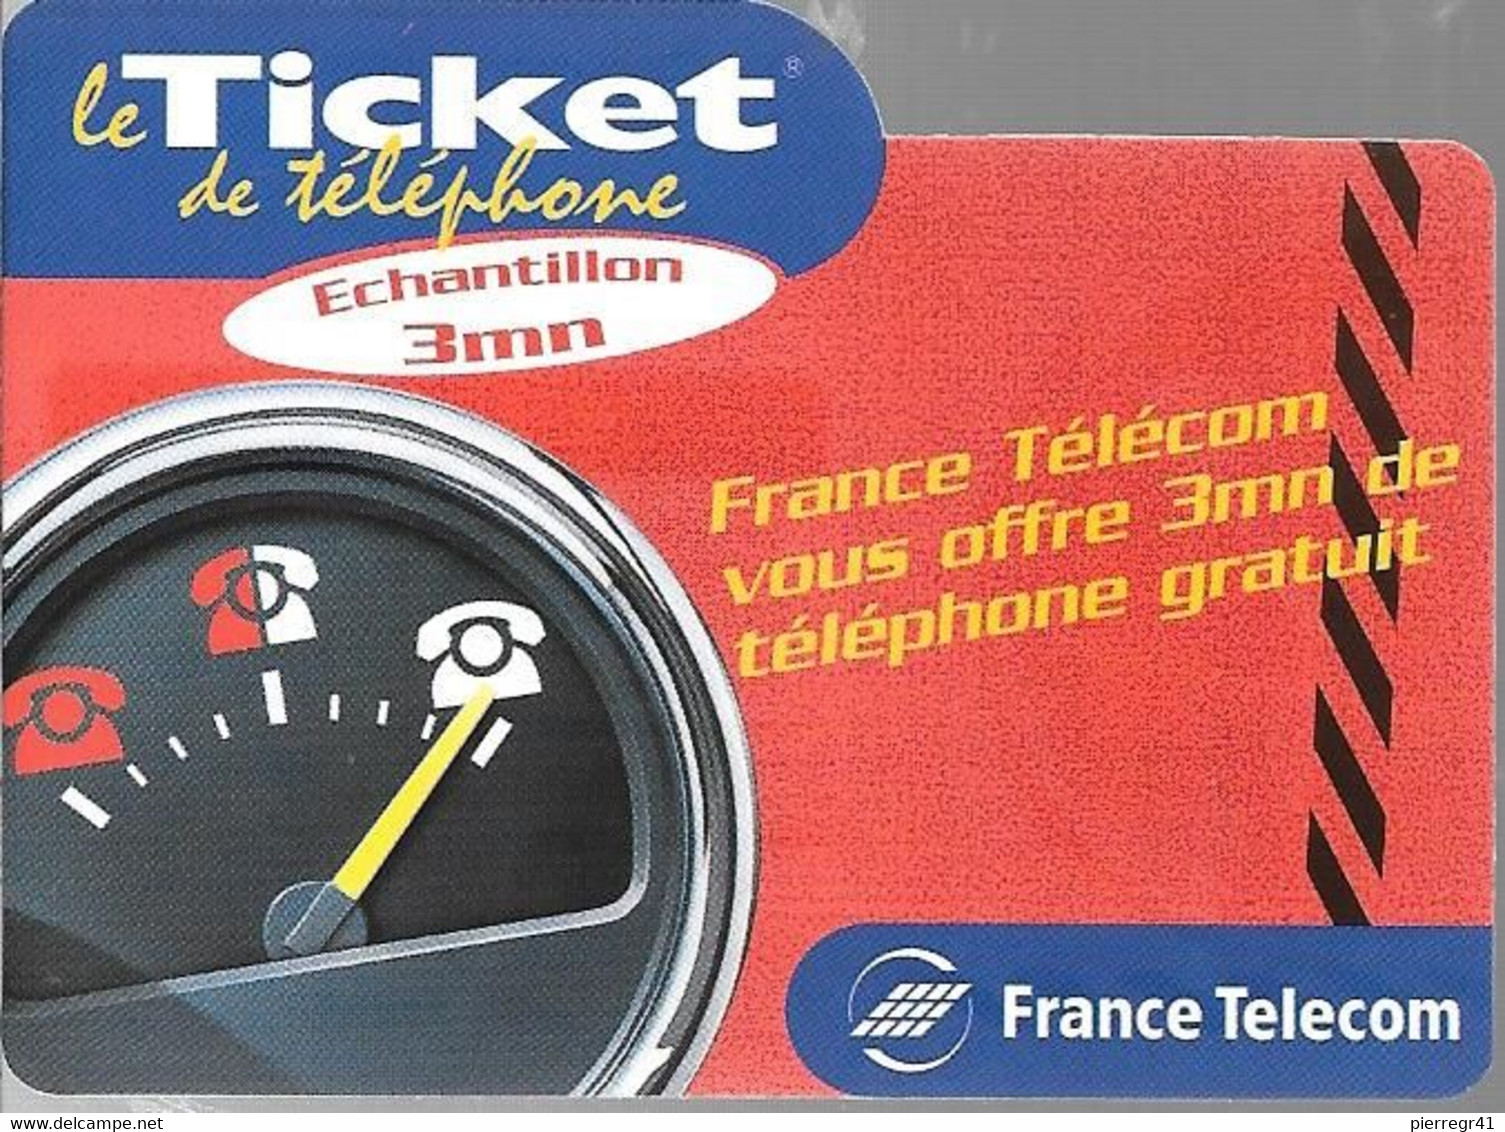 TICKET² TELEPHONE-PRIVE-FRANCE-TK-PR08E-3Mn-COMPTEUR 1-Exp 30/11/2000-Neuf-TBE/RARE - FT Tickets